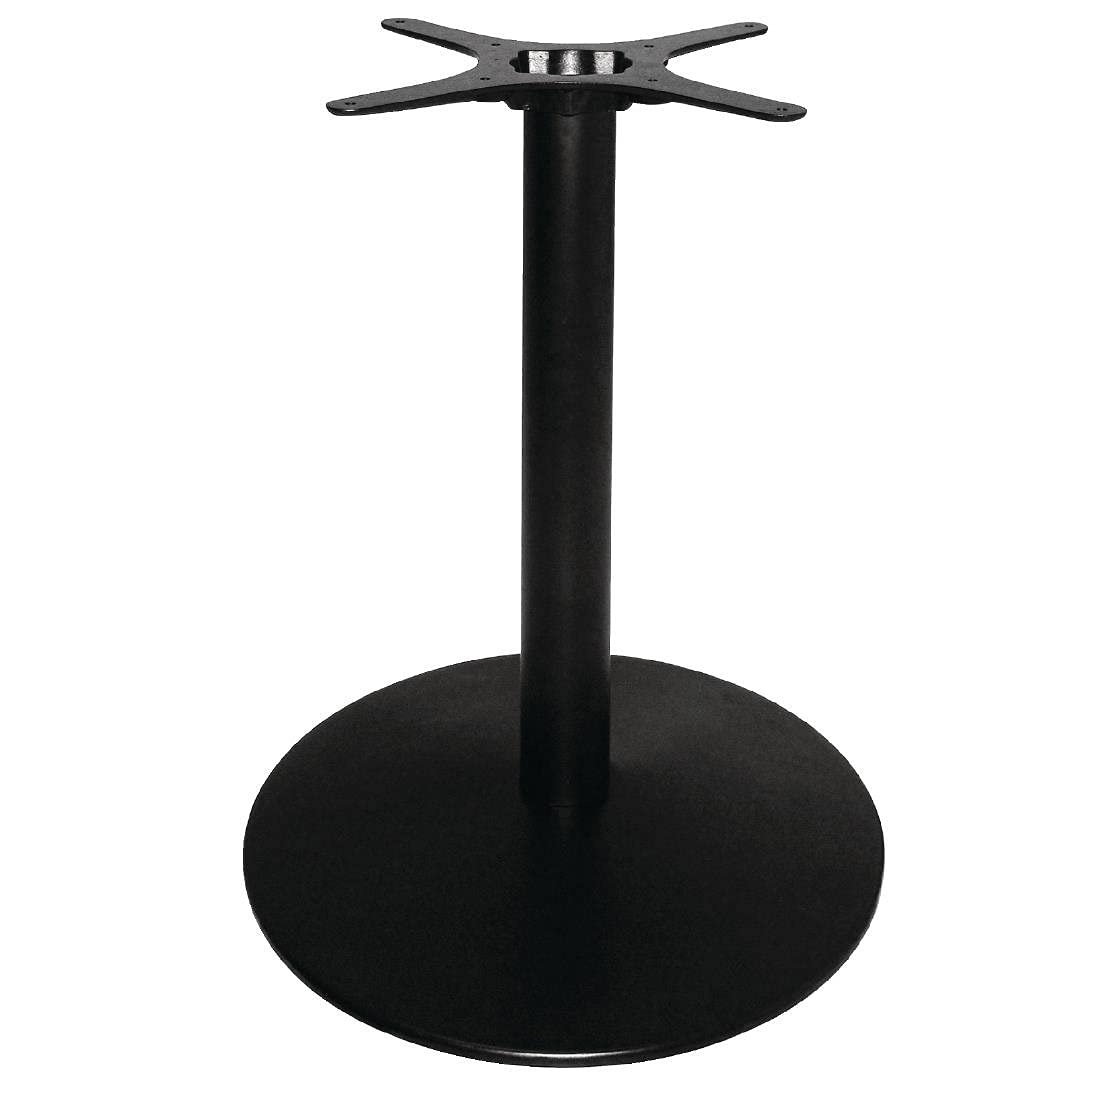 Wrought iron table stand